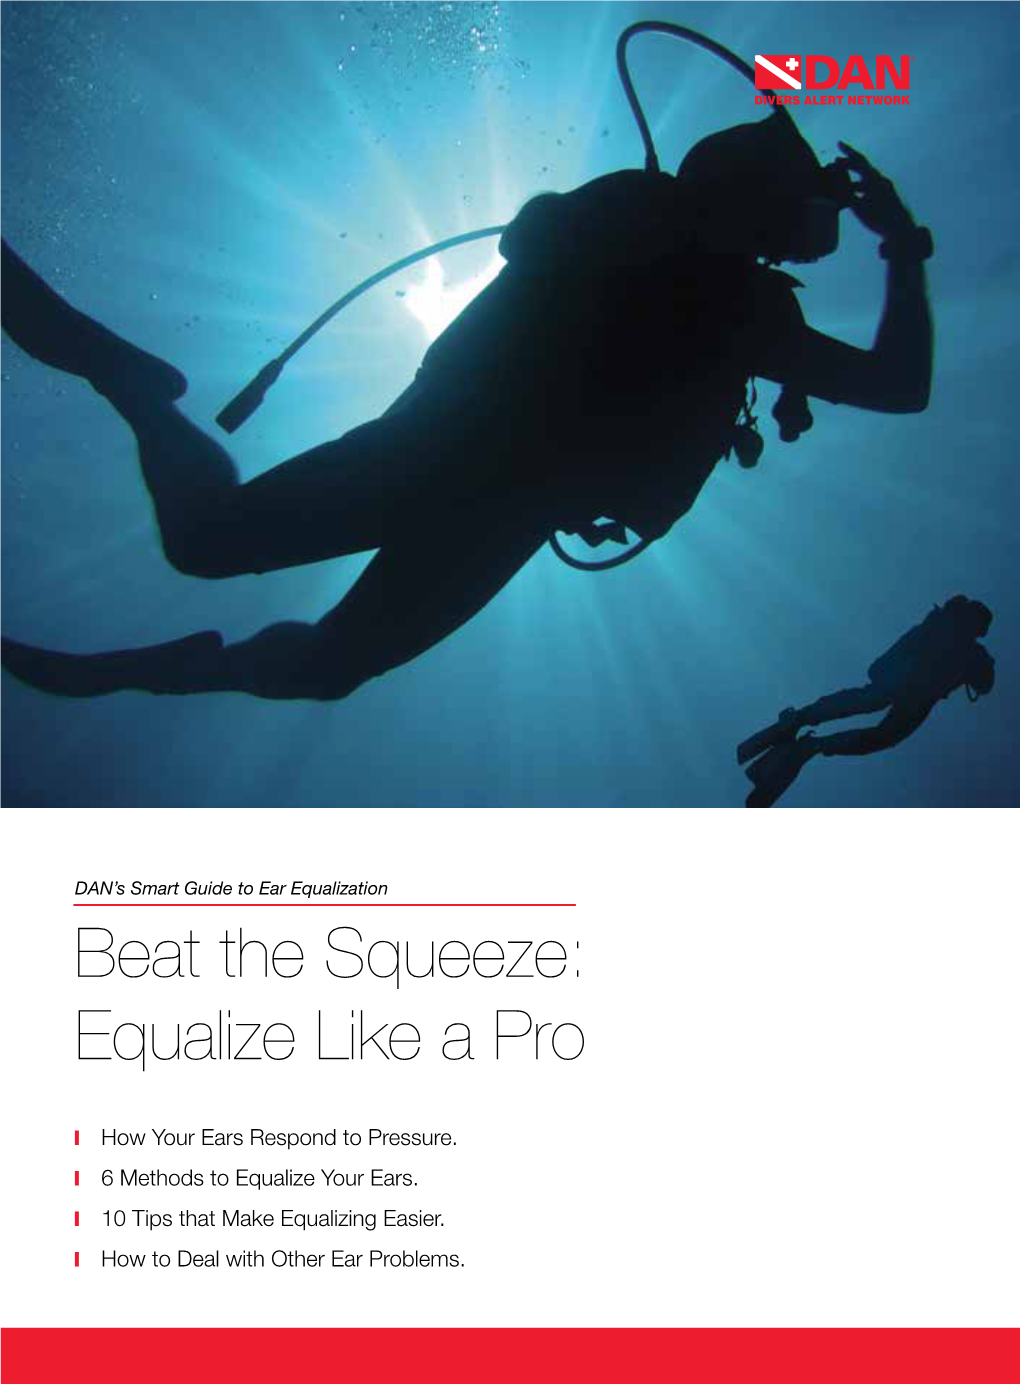 Beat the Squeeze: Equalize Like a Pro